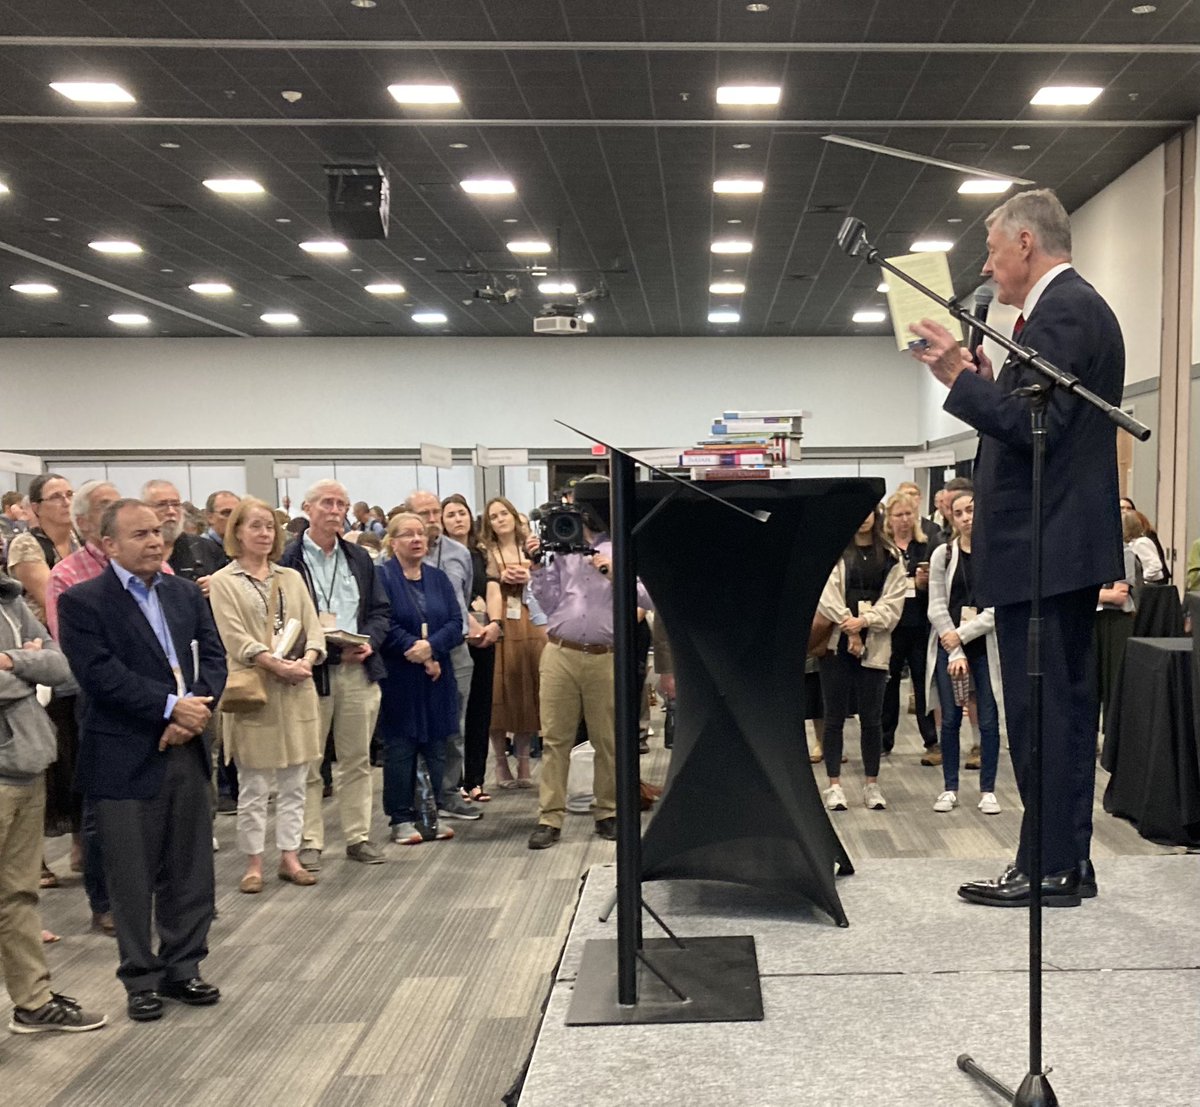 Walk about the Bookstore by @DrStevenJLawson at #ligcon did a great job‼️